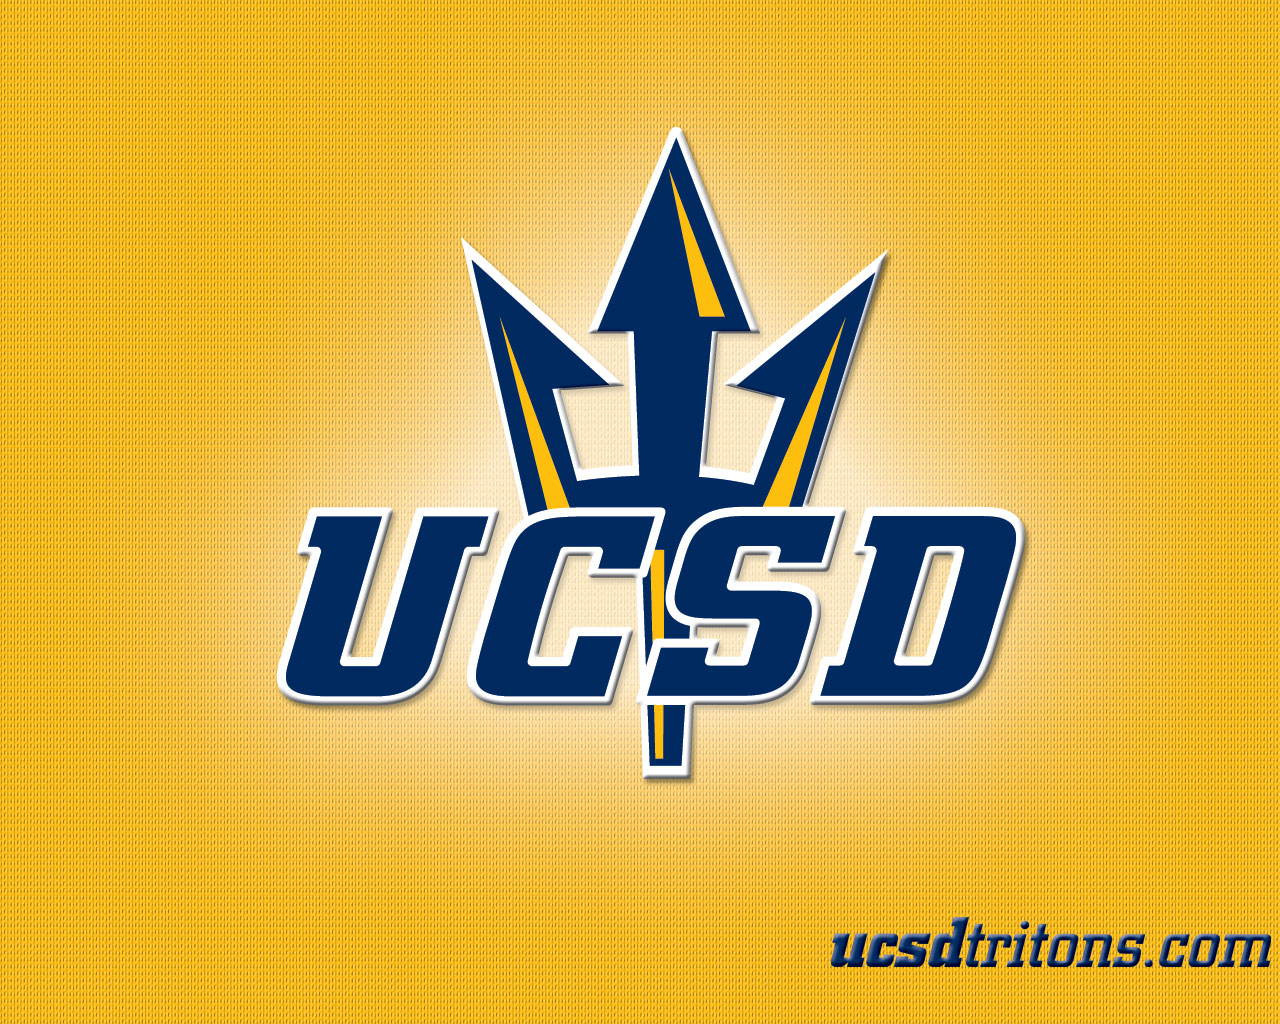 Wallpaper Ucsdtritons Official Web Site Of Uc San Diego